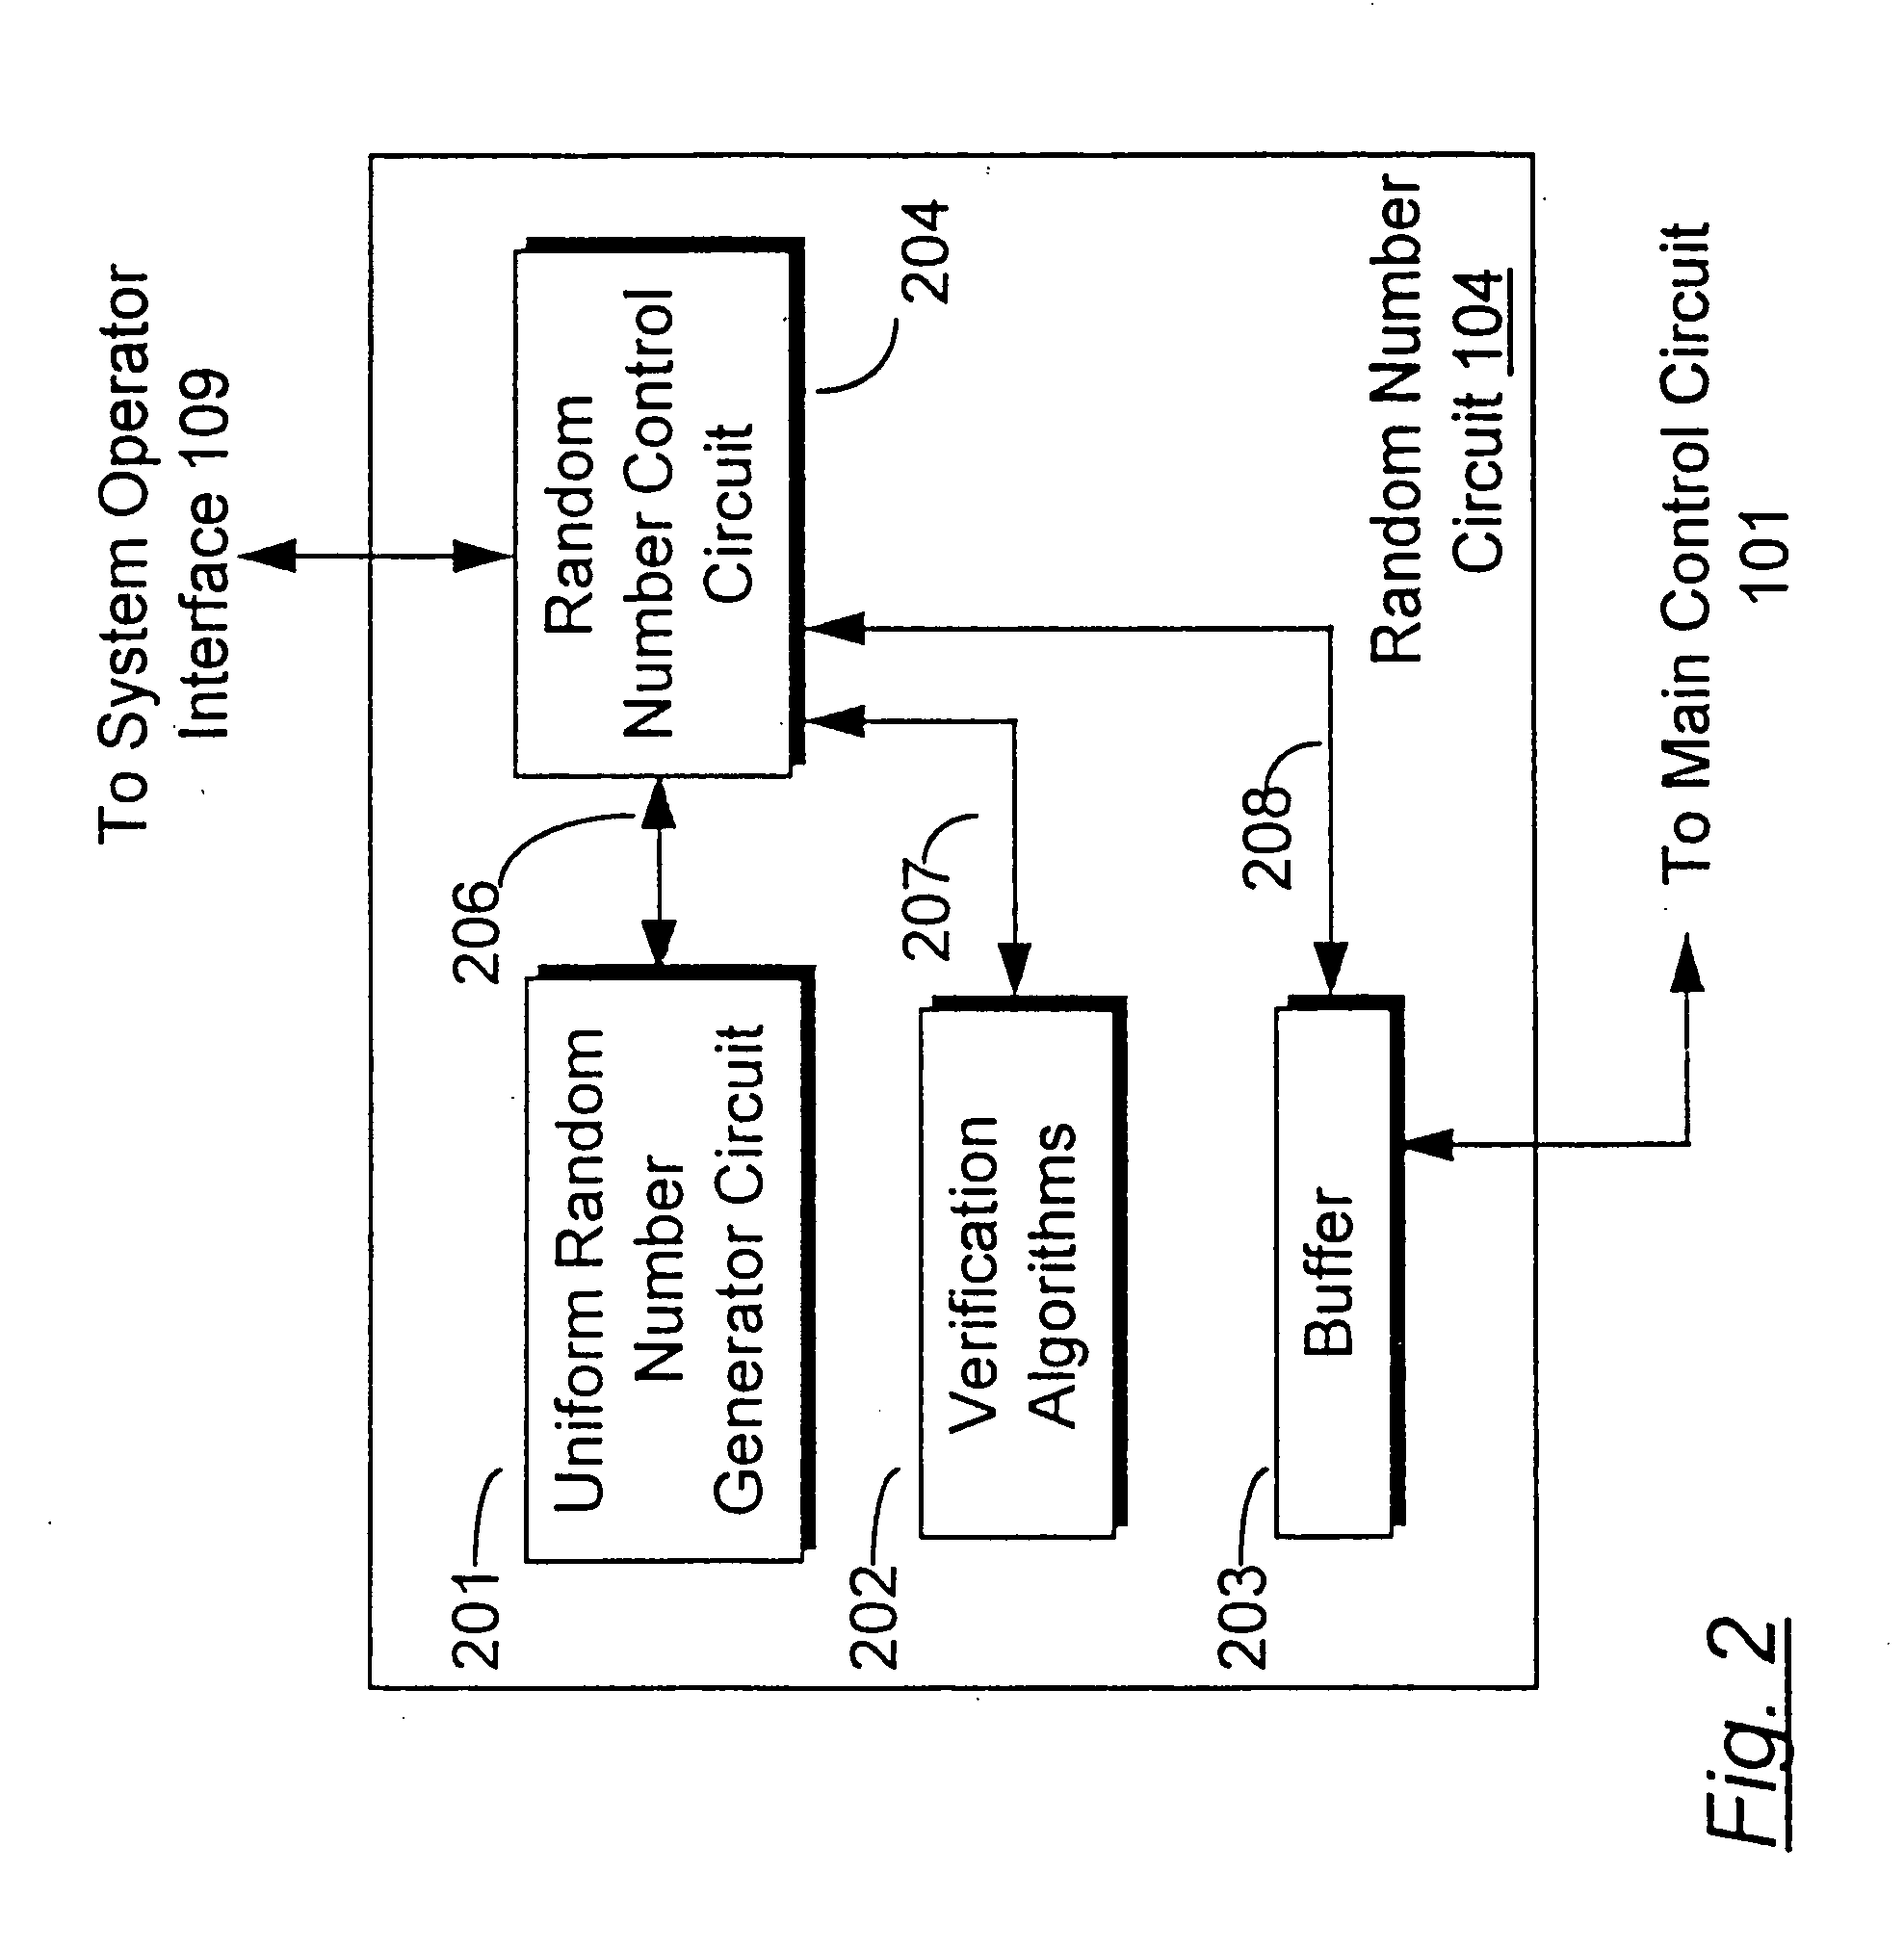 Method for control of gaming systems and for generating random numbers